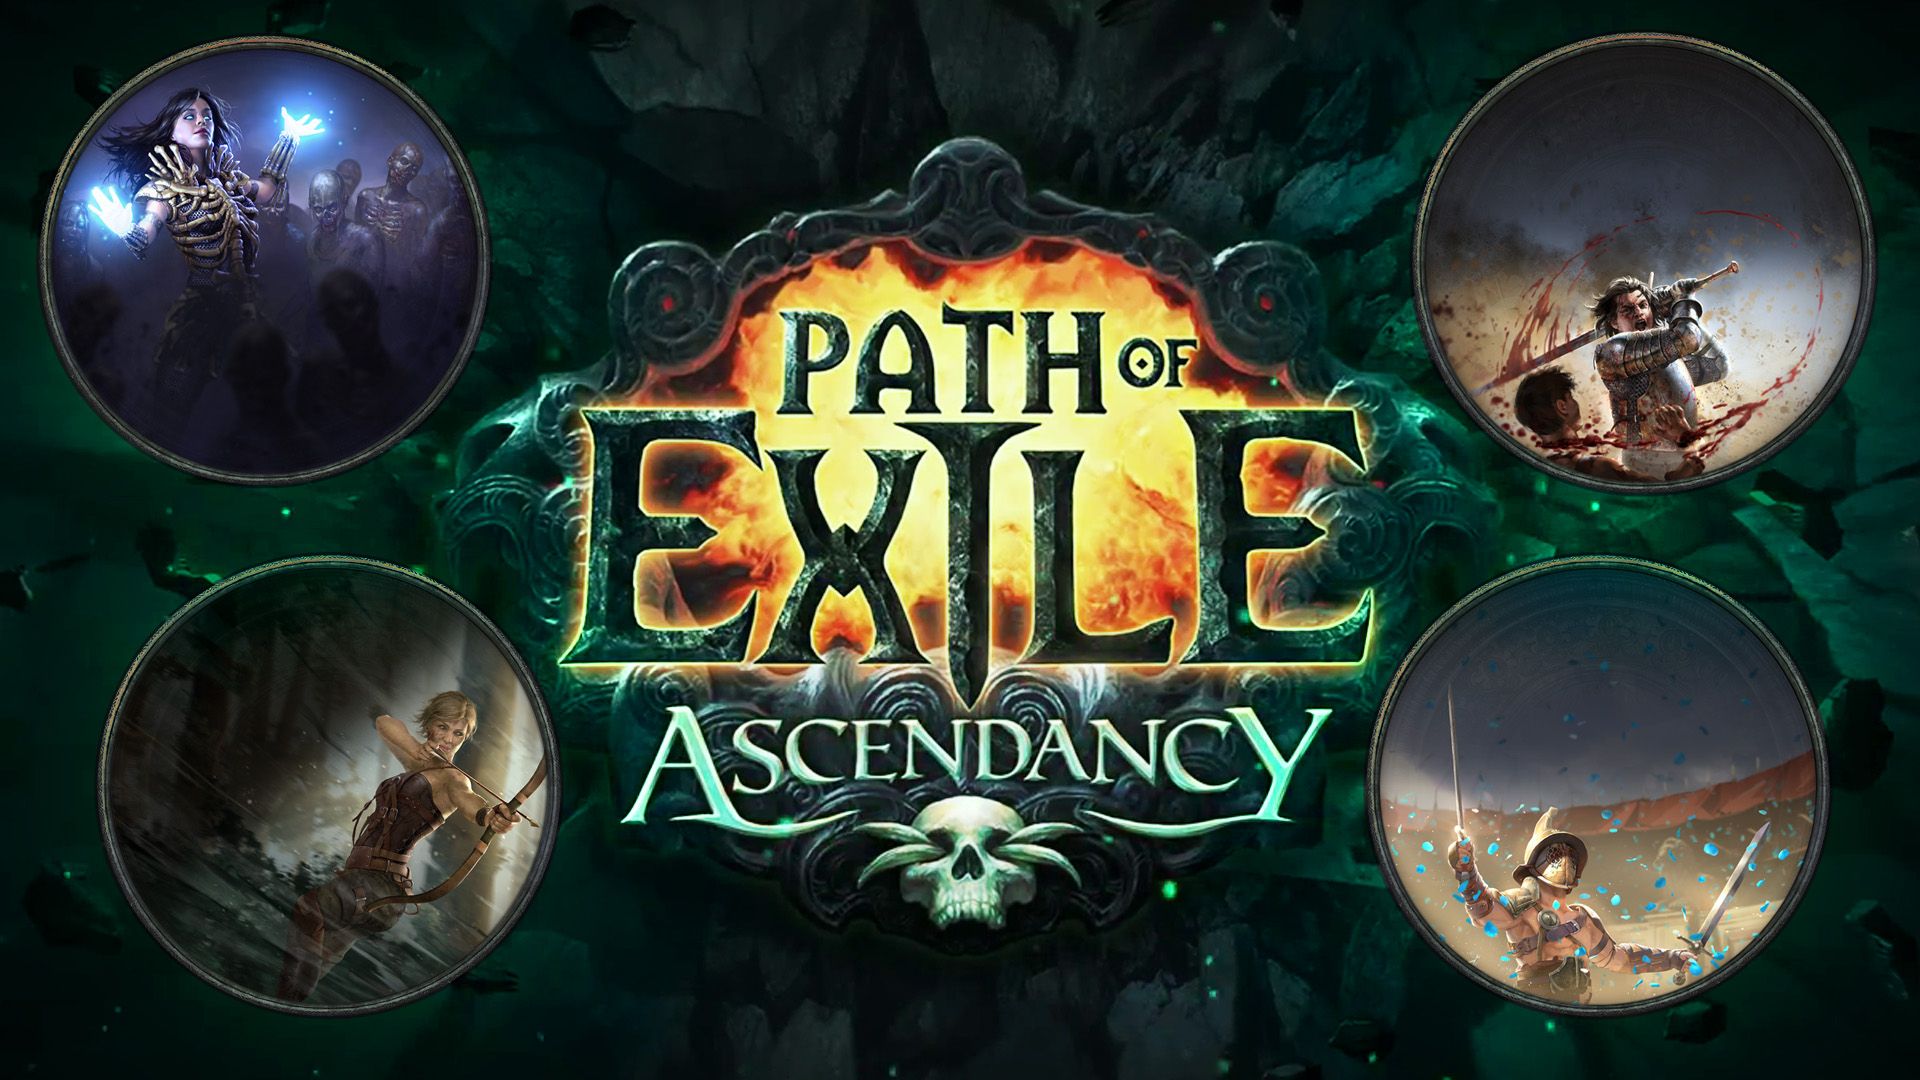 Path of exile steam or not фото 37